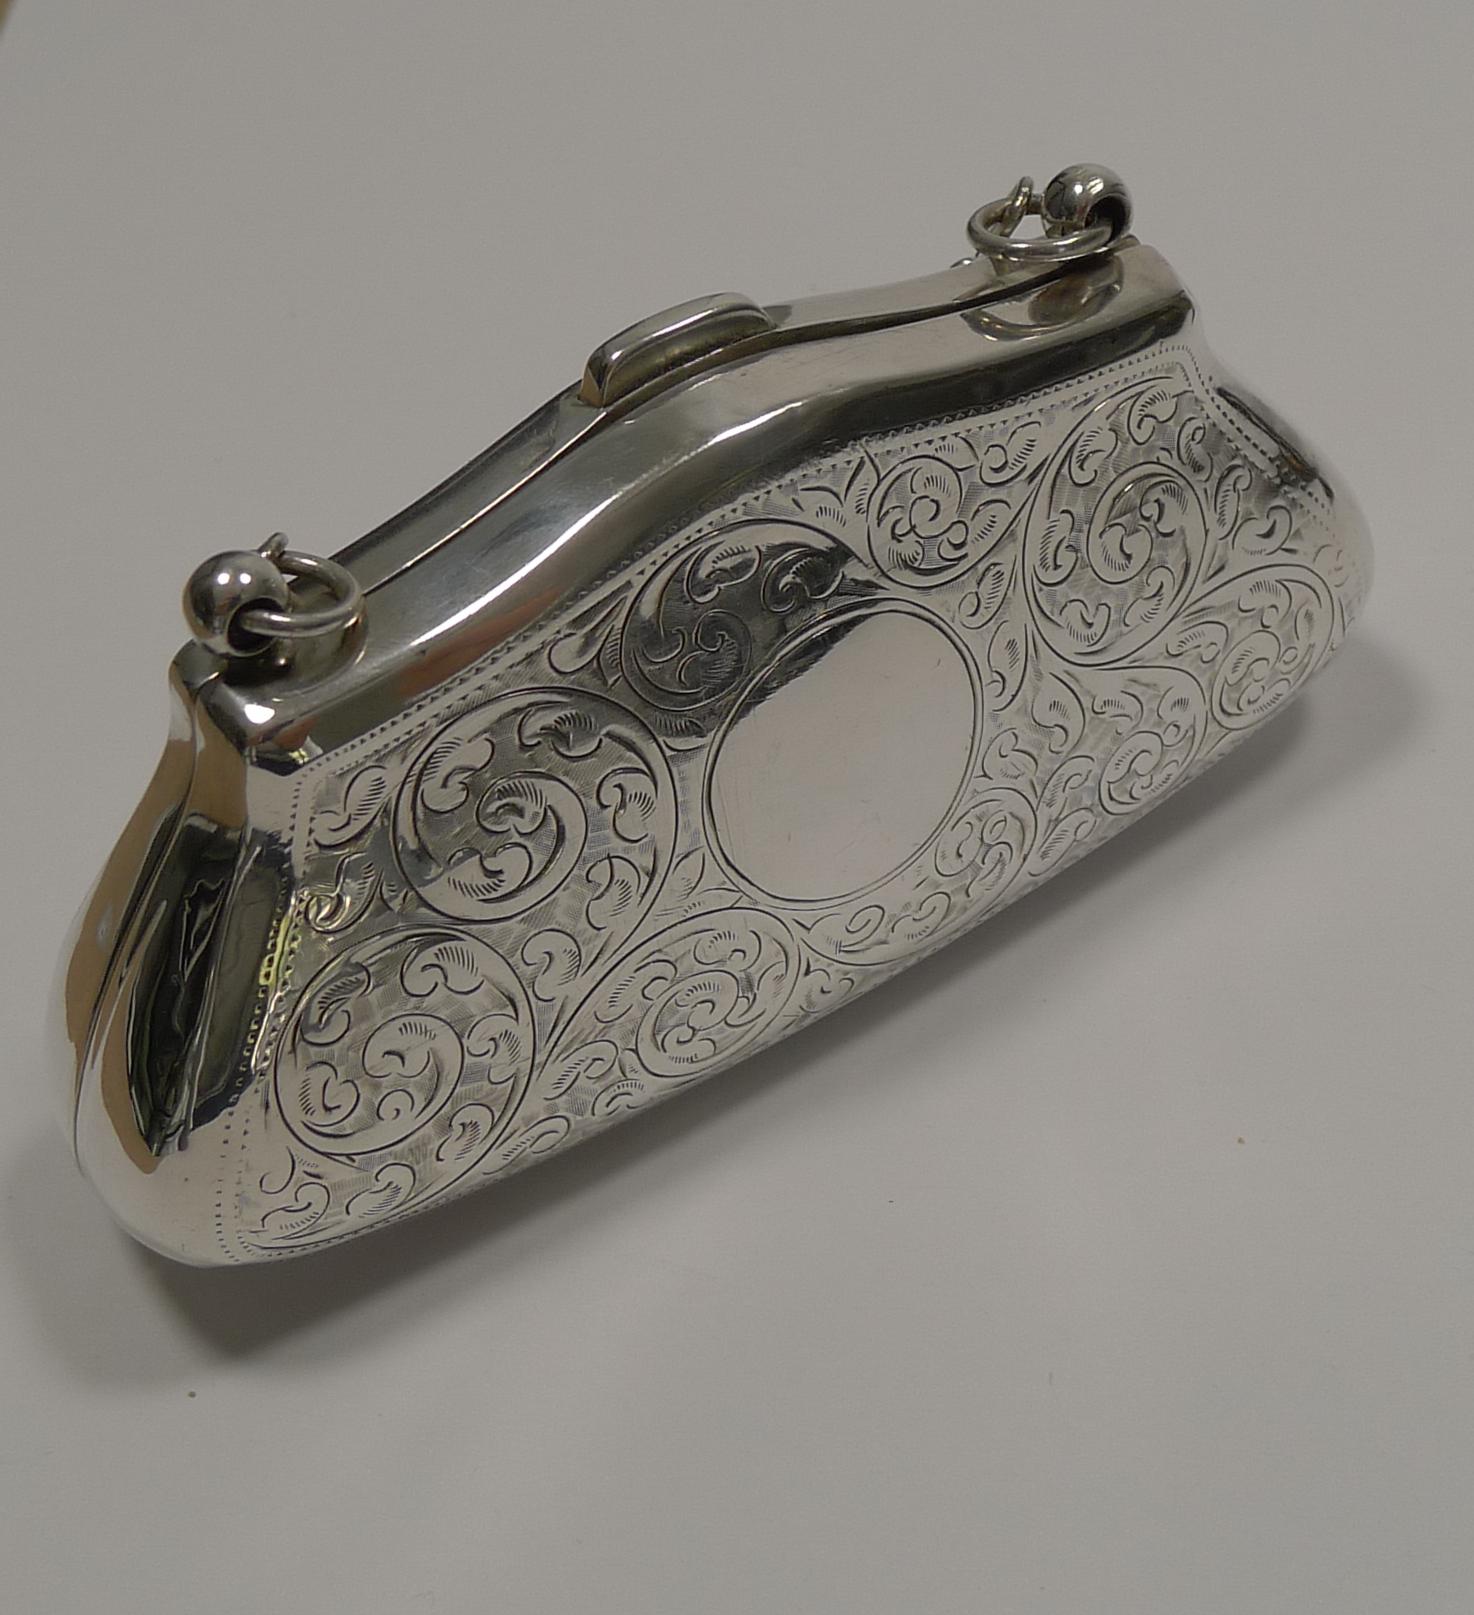 Edwardian Antique English Sterling Silver Coin Purse, 1913